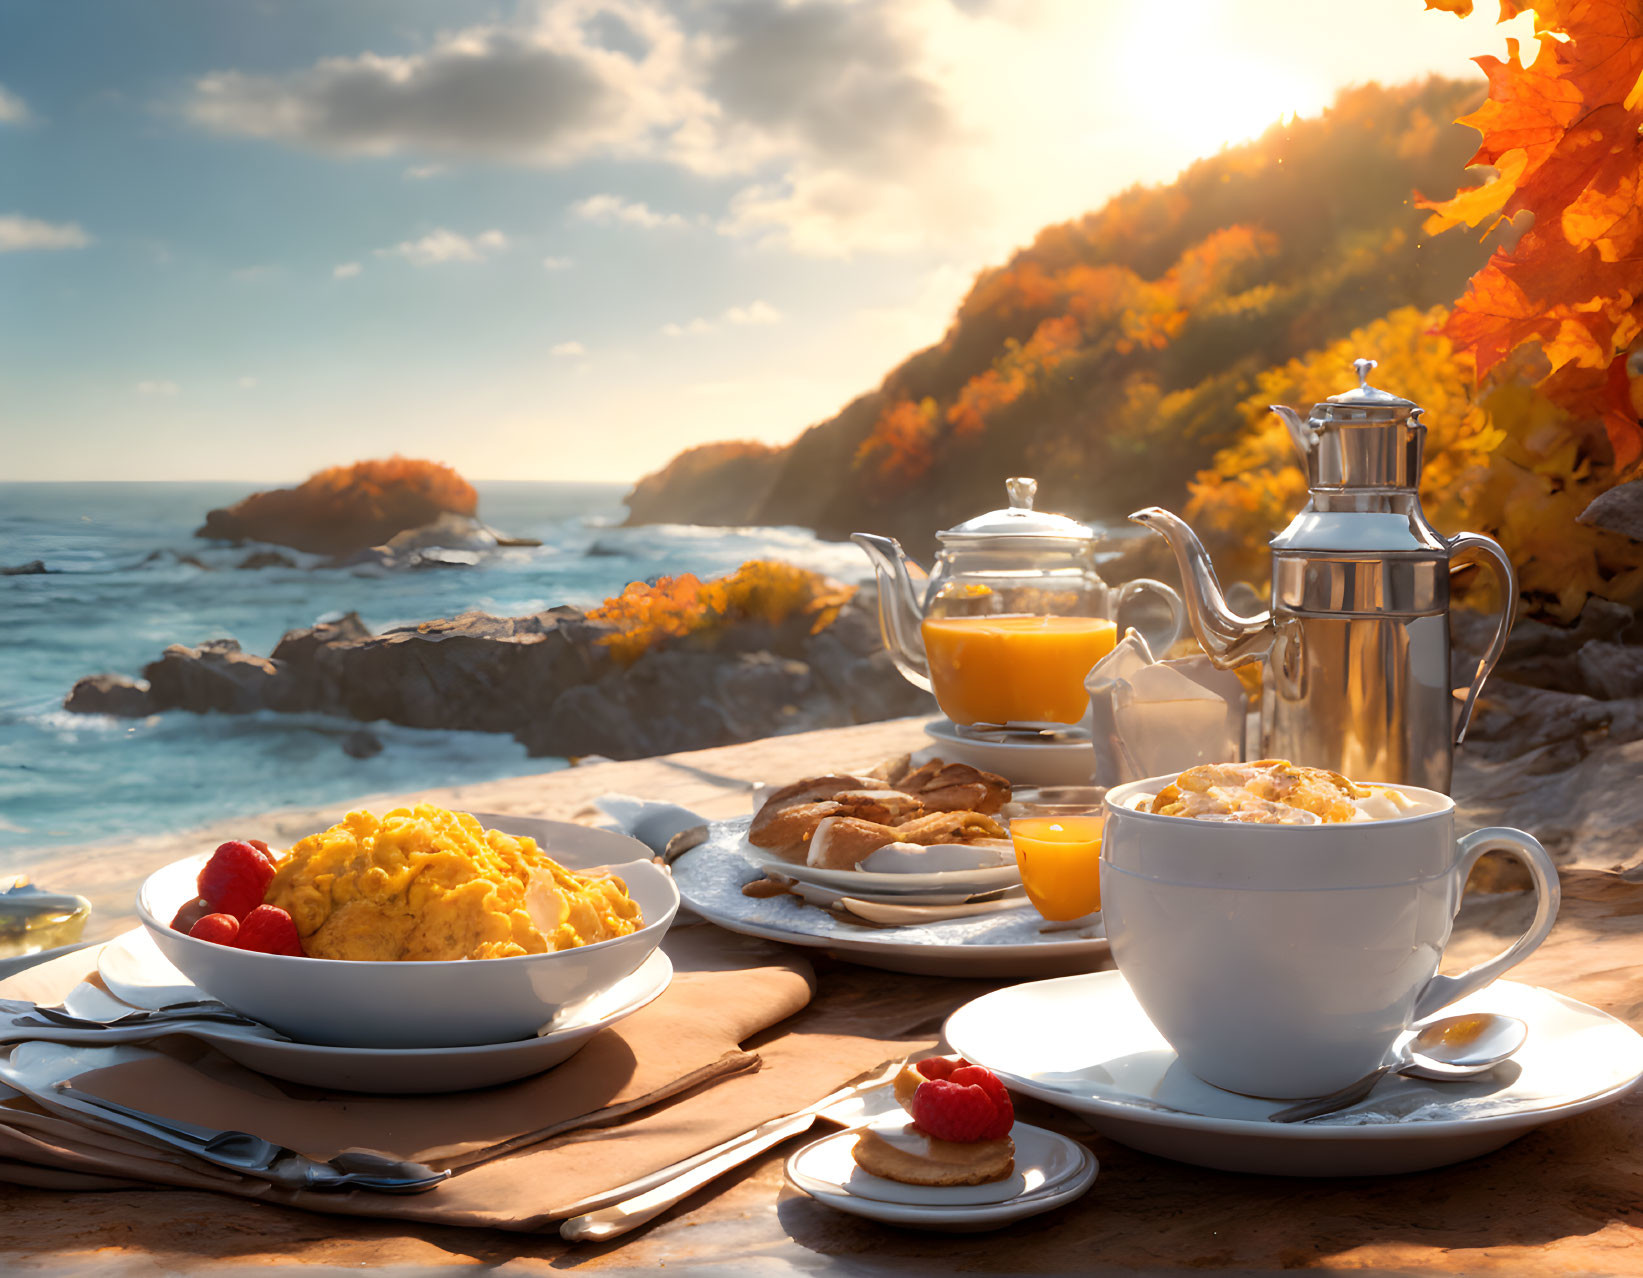 Breakfast Table in Autumn by the Sea